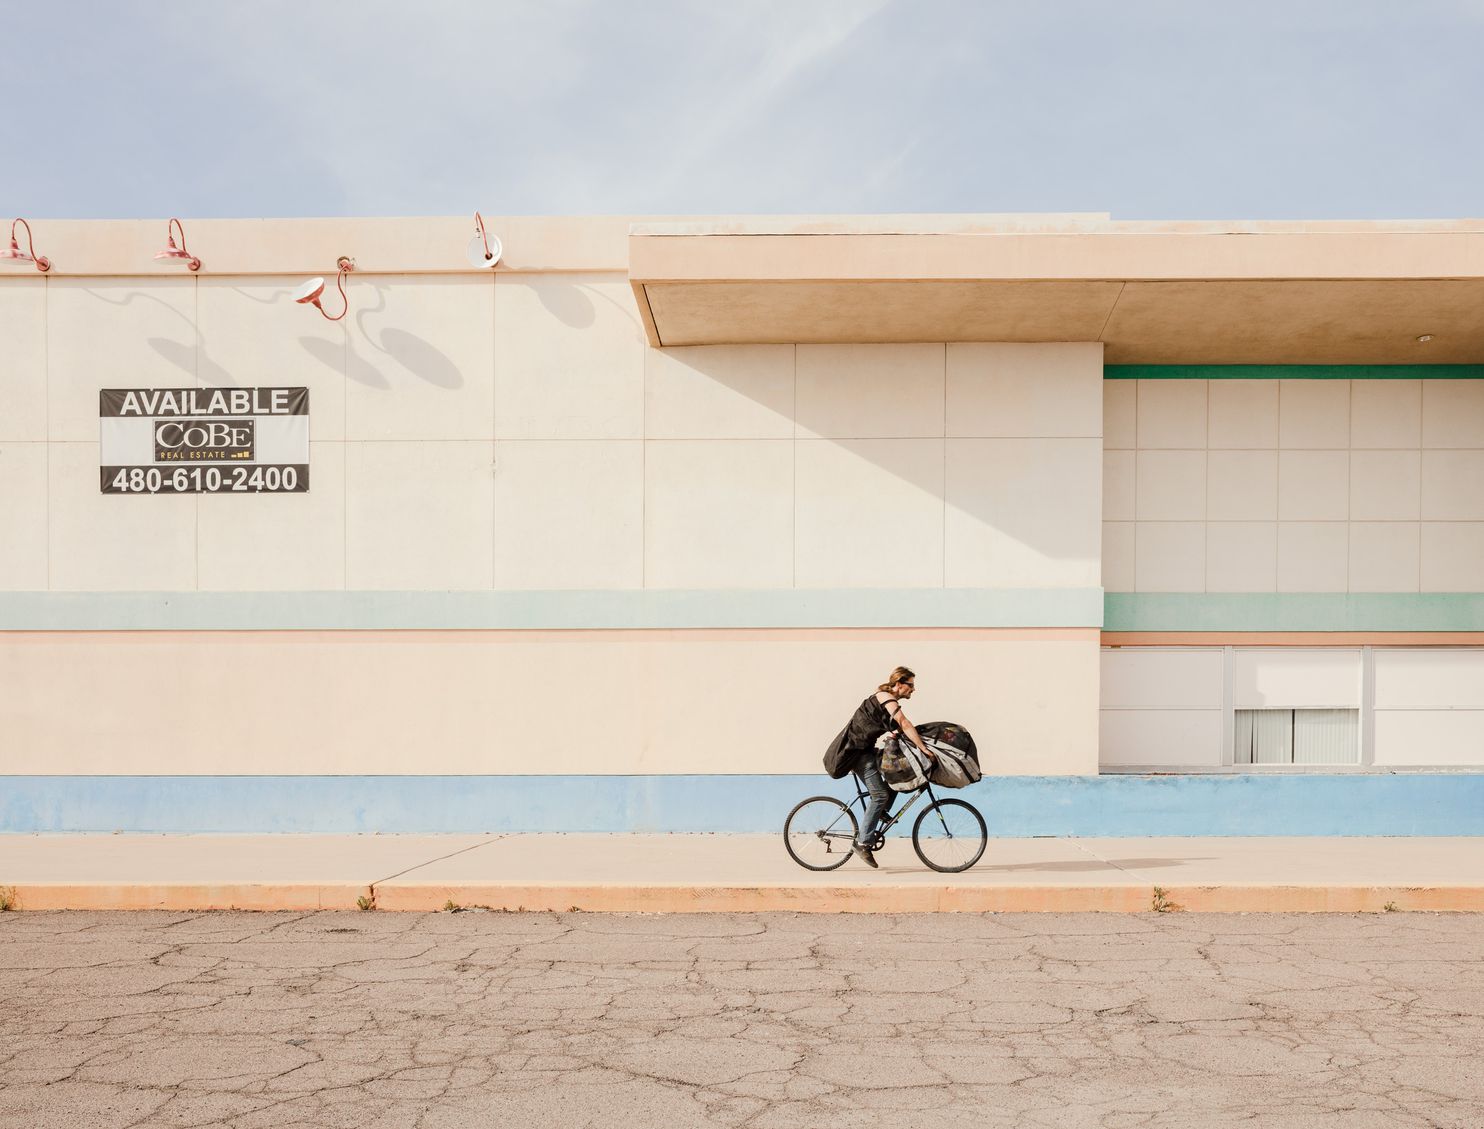 Jesse Rieser photographs the changing landscape of American retail – The Washington Post